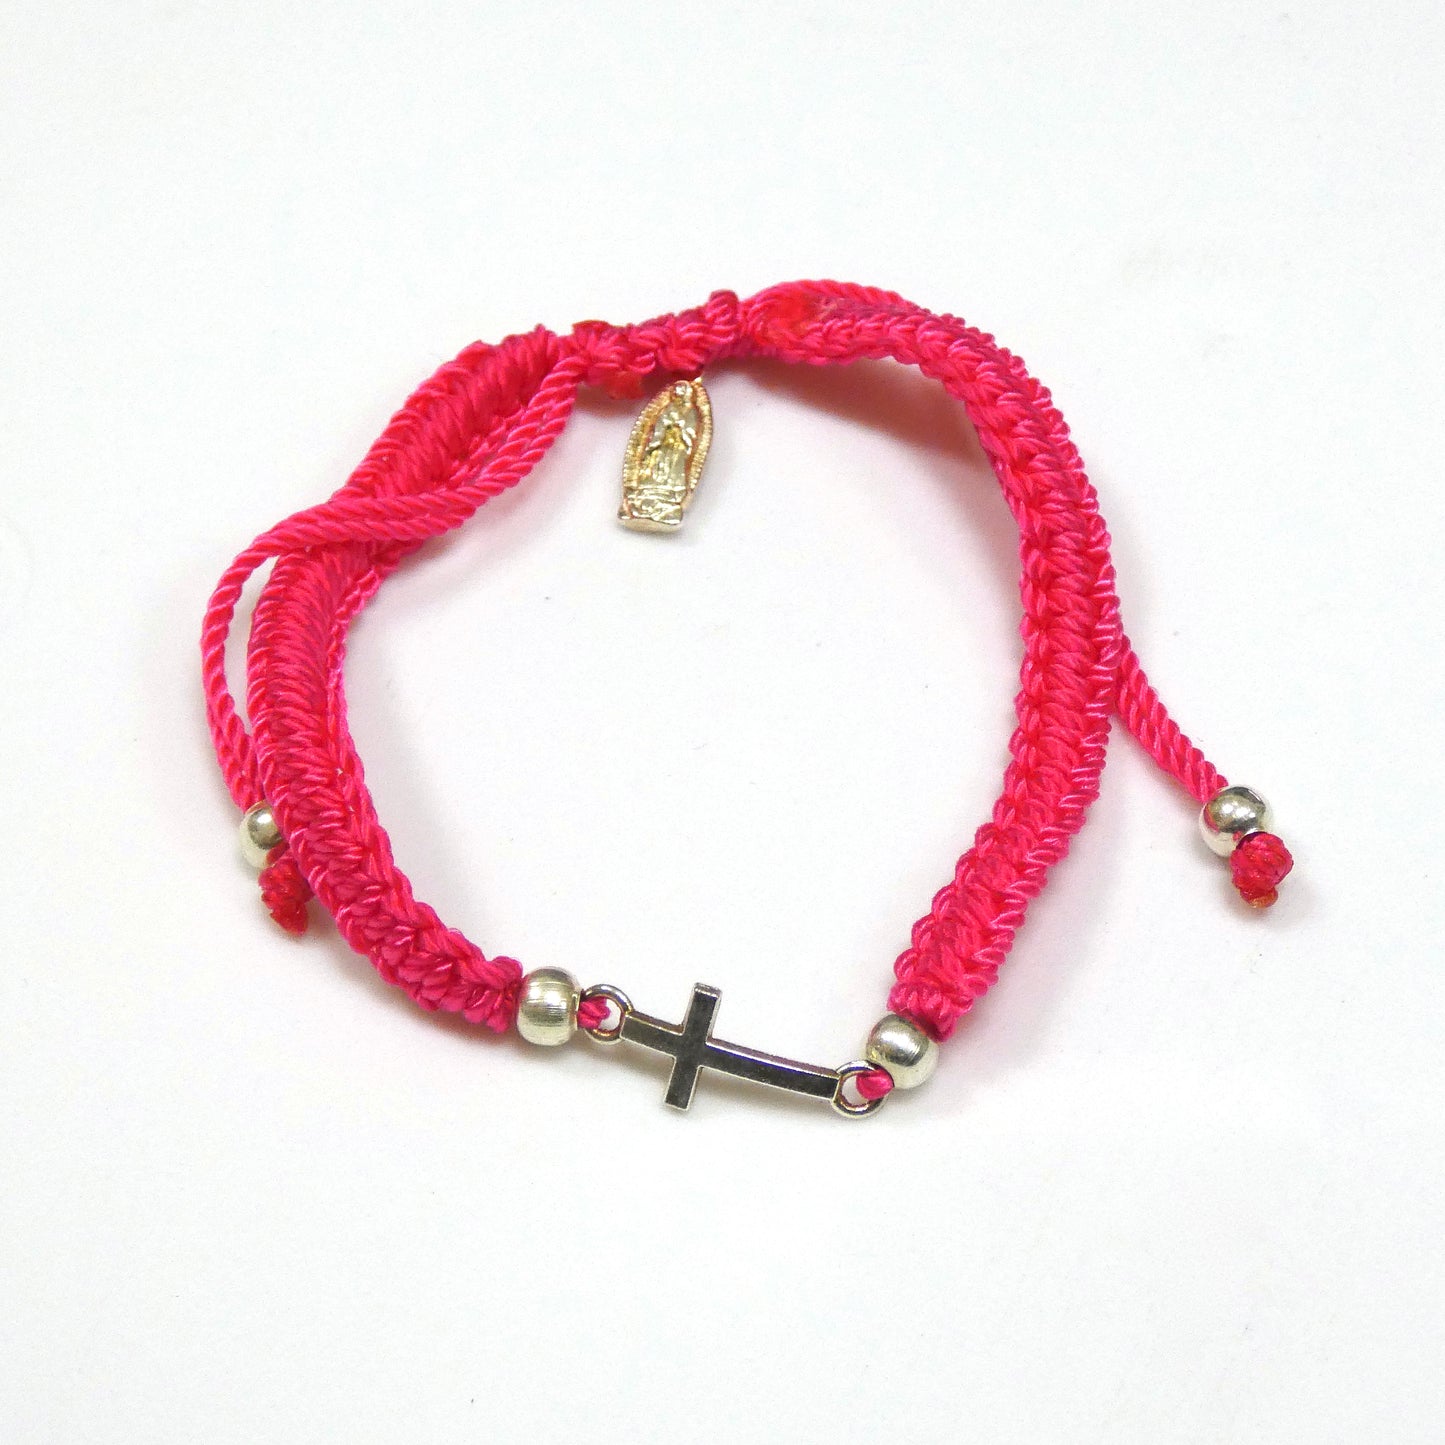 Braided Bracelet of Assorted Colors with Metal Cross and Guadalupe Medal